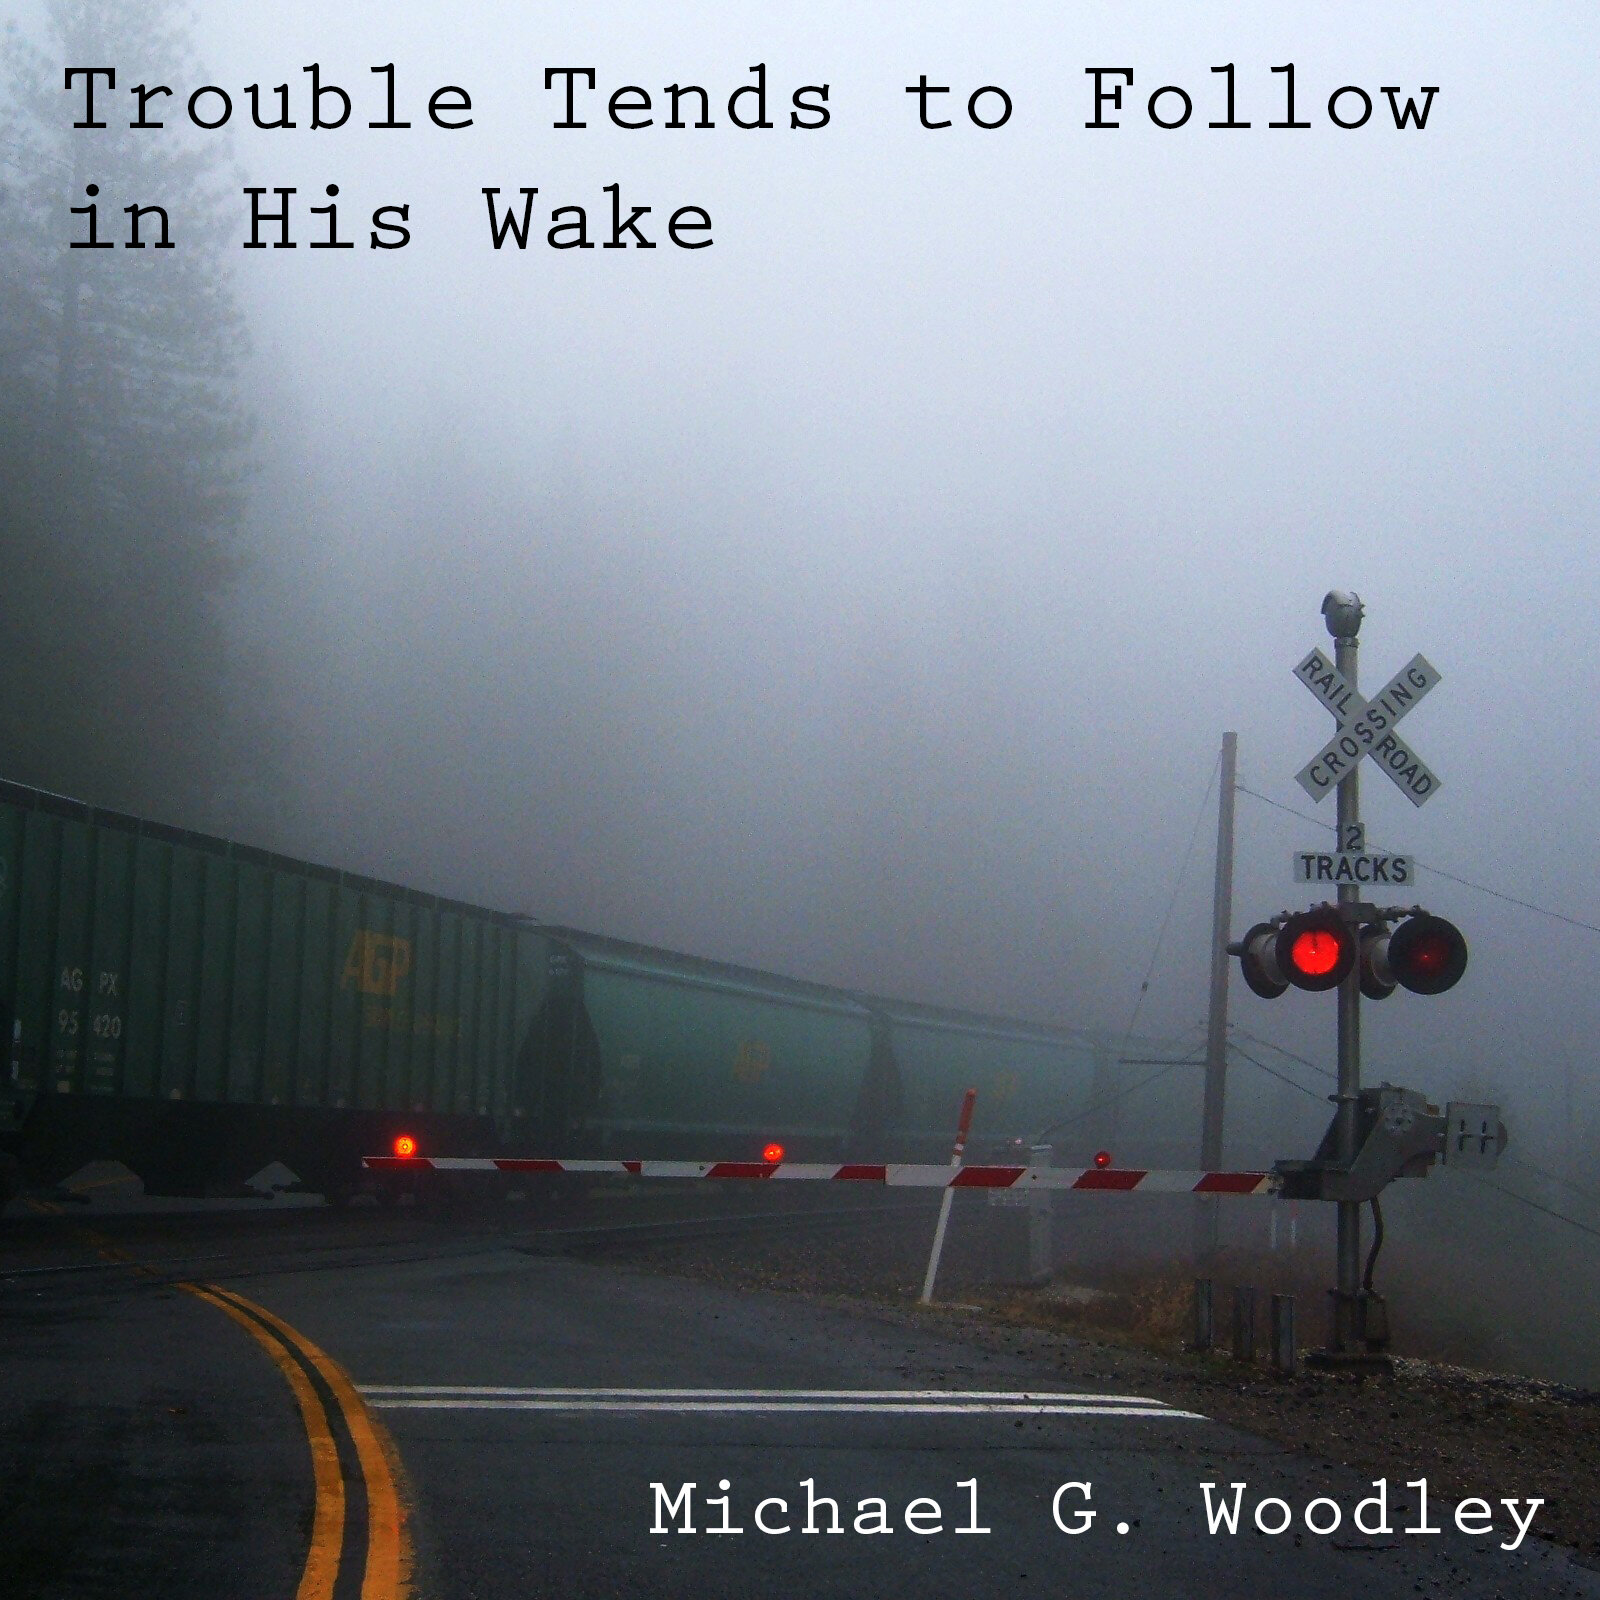 Michael G Woodley-Trouble Tends To Follow in His Wake.jpg